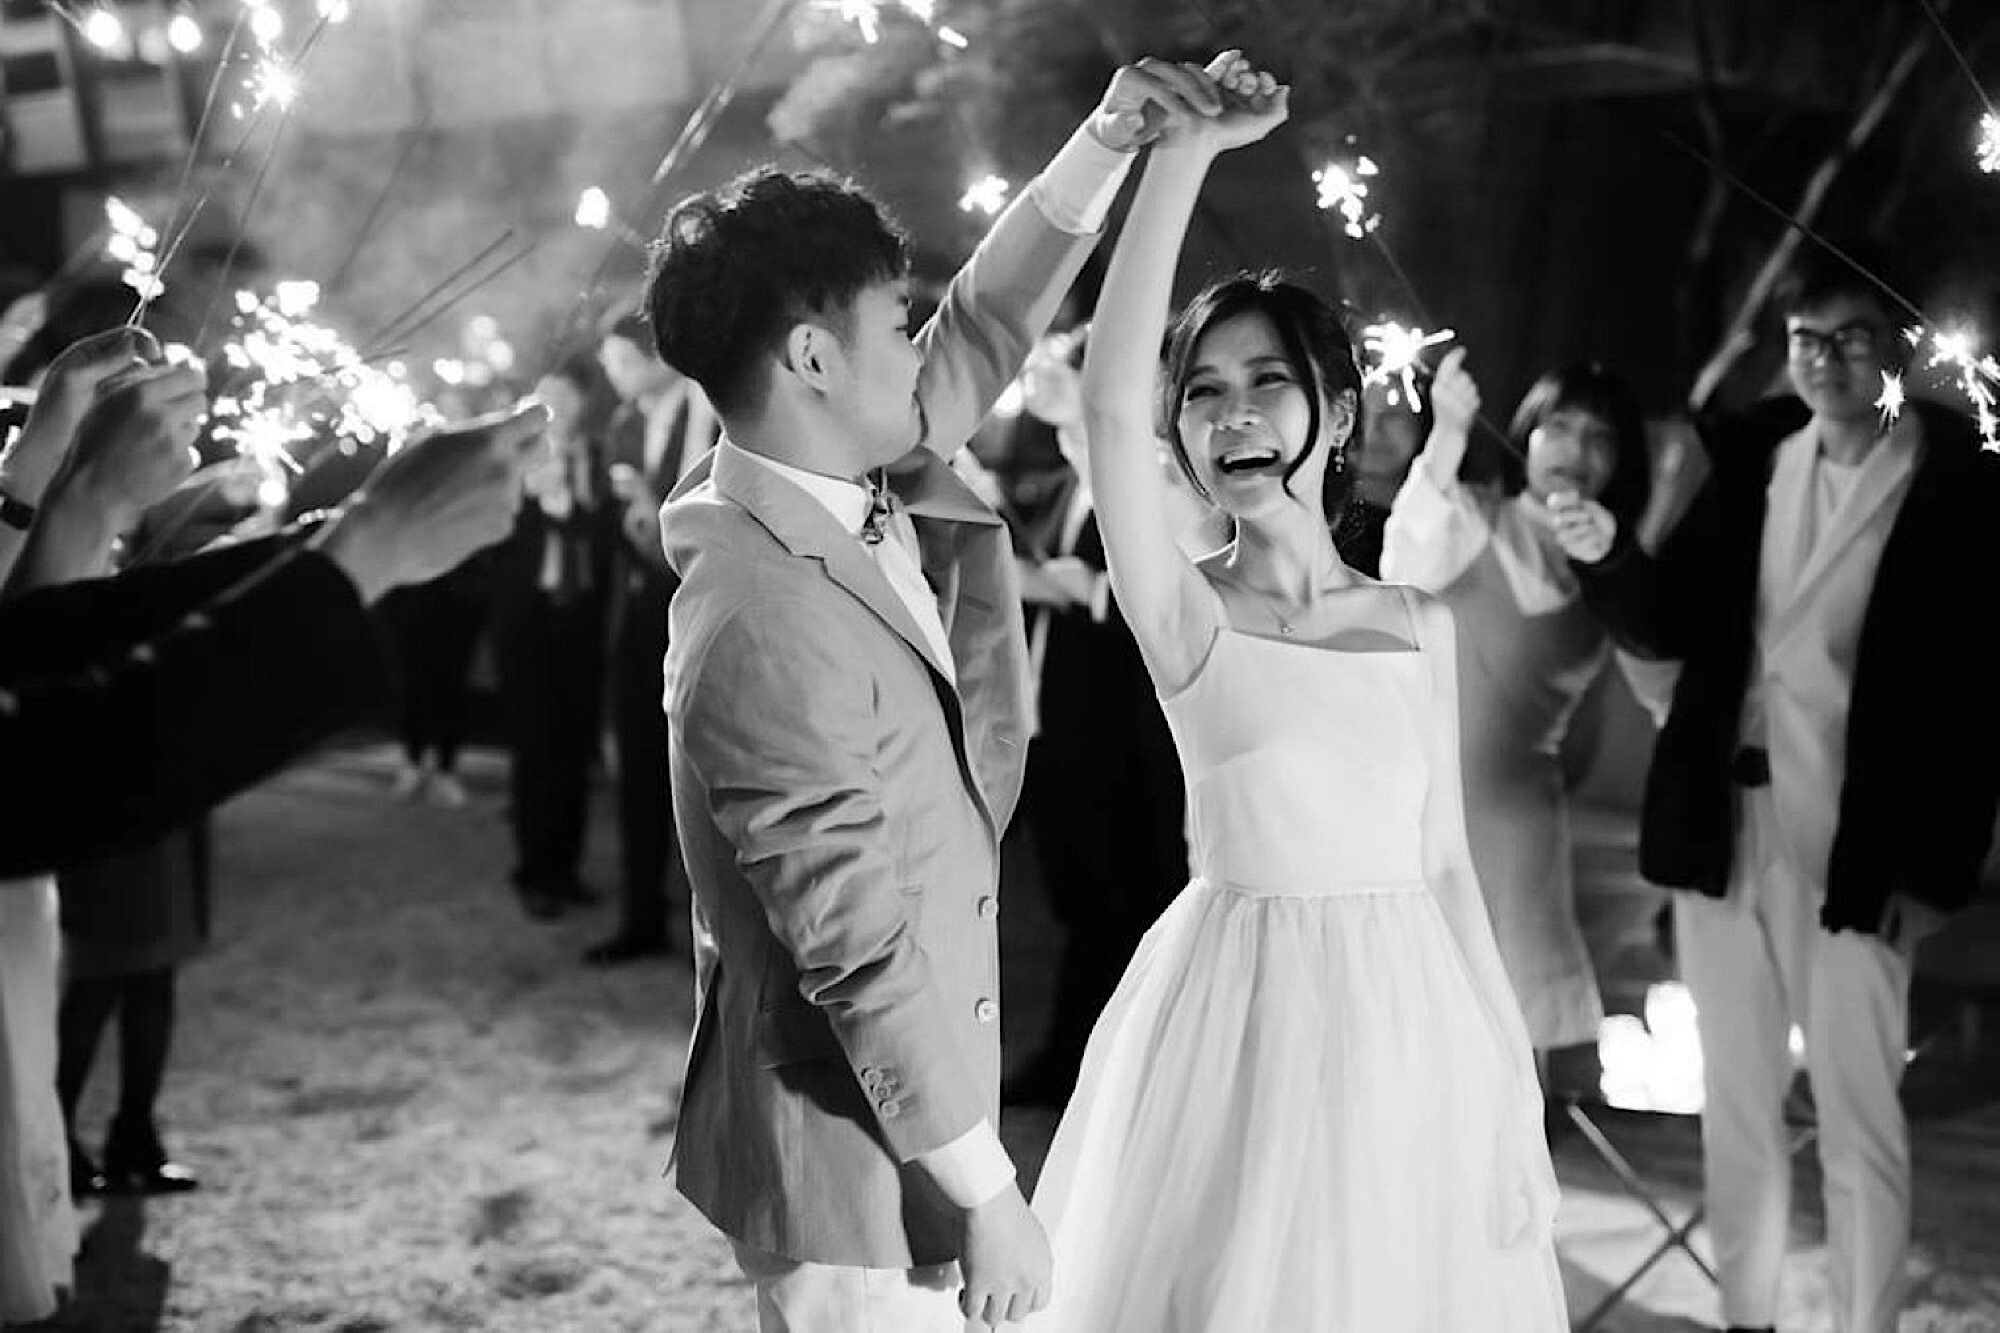 A romantic sparkler exit at a JM Cellars wedding in Woodinville